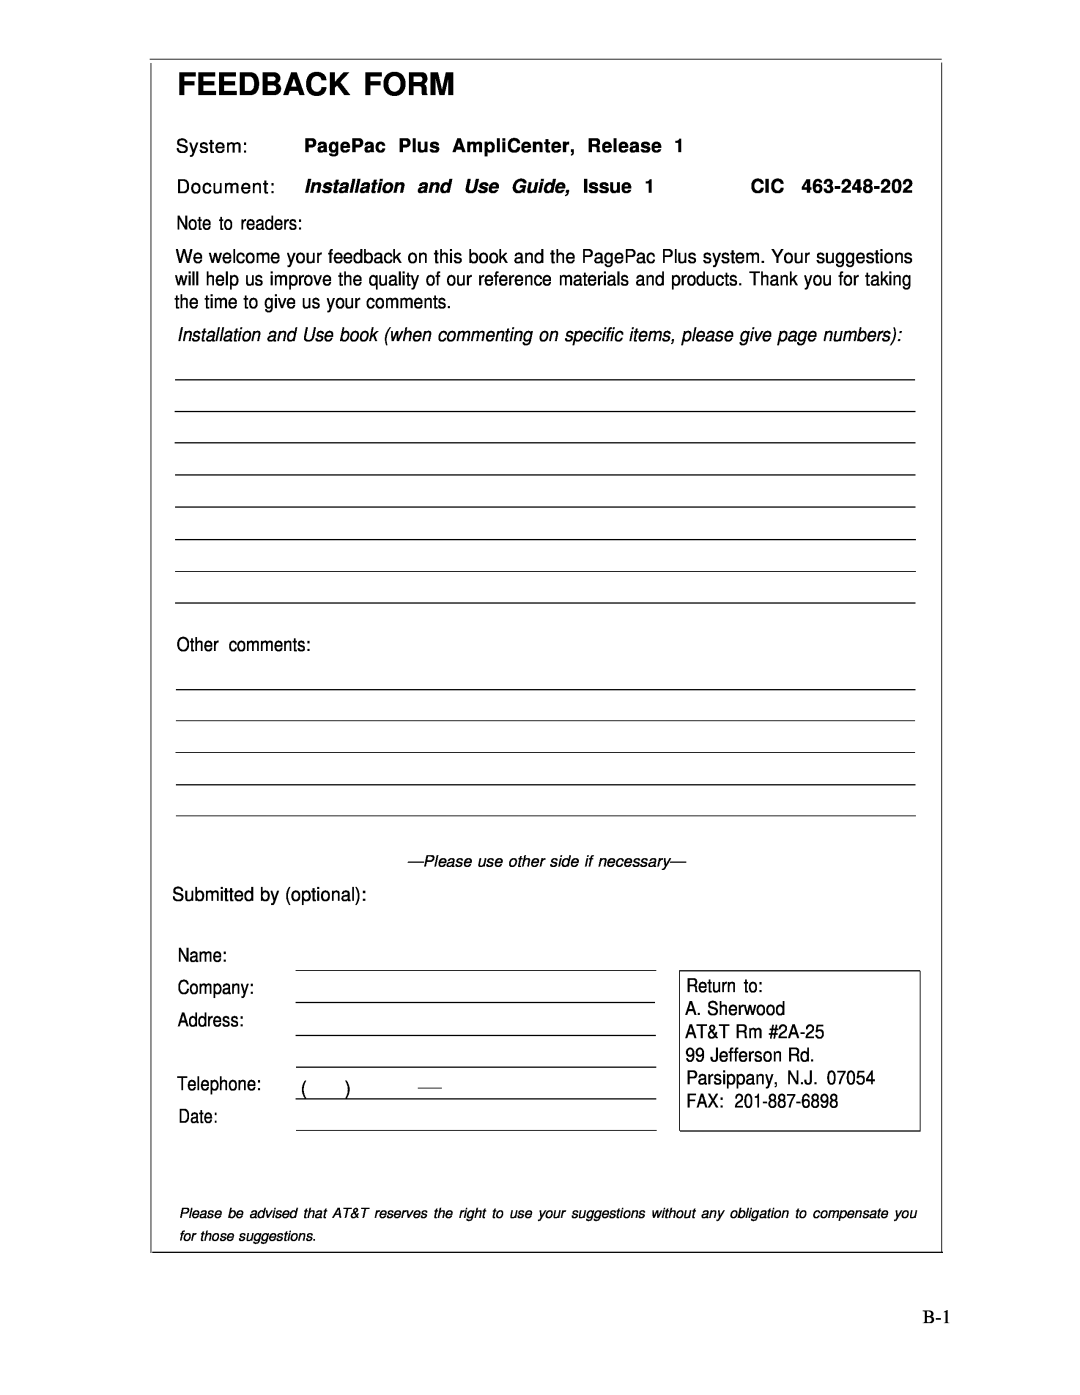 ATTO Technology 463-248-202 manual Feedback Form, System PagePac Plus AmpliCenter, Release 